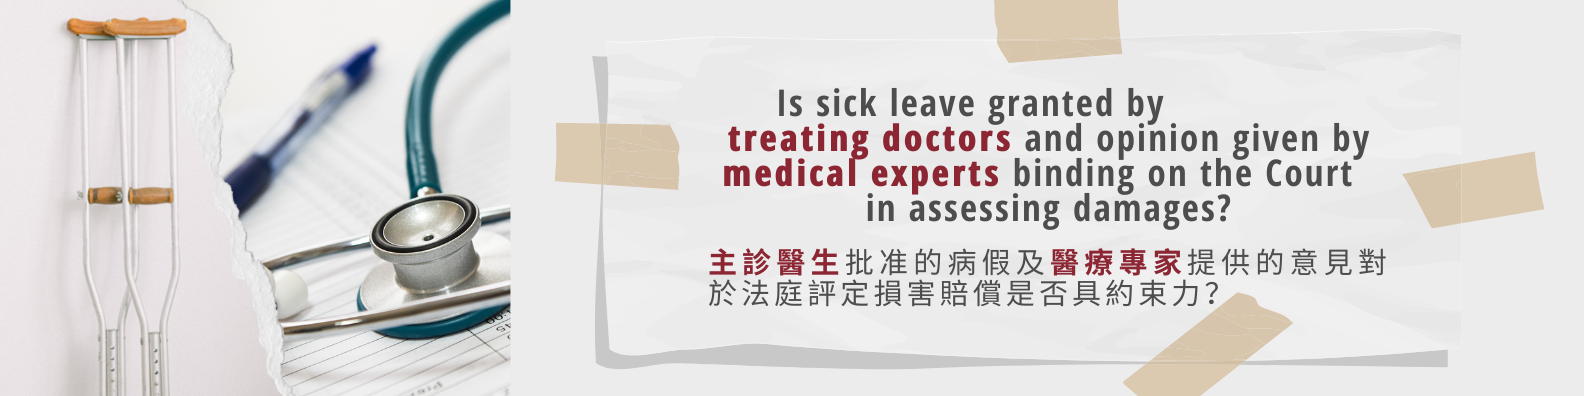 Is sick leave granted by treating doctors and opinion given by medical experts binding on the Court in assessing damages?